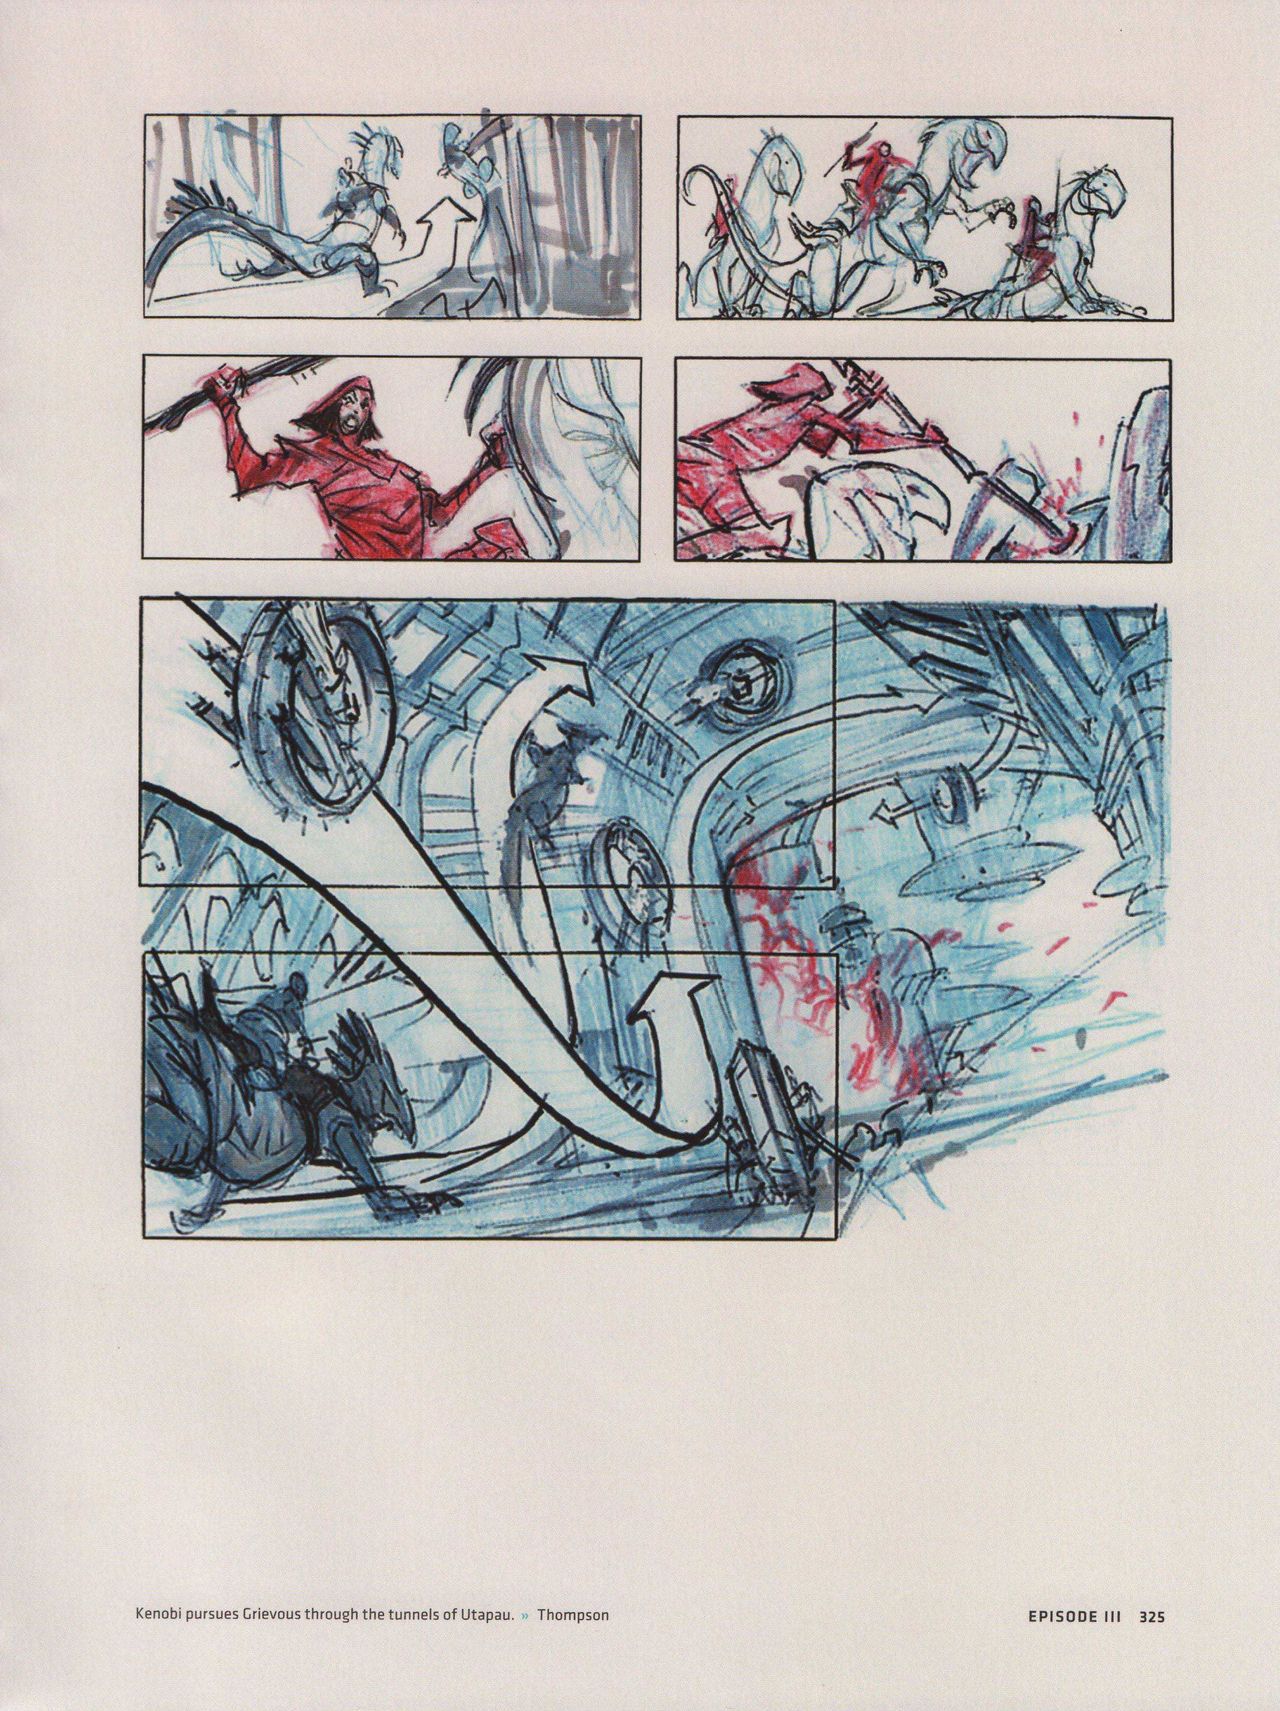 Star Wars Storyboards - The Prequel Trilogy 329